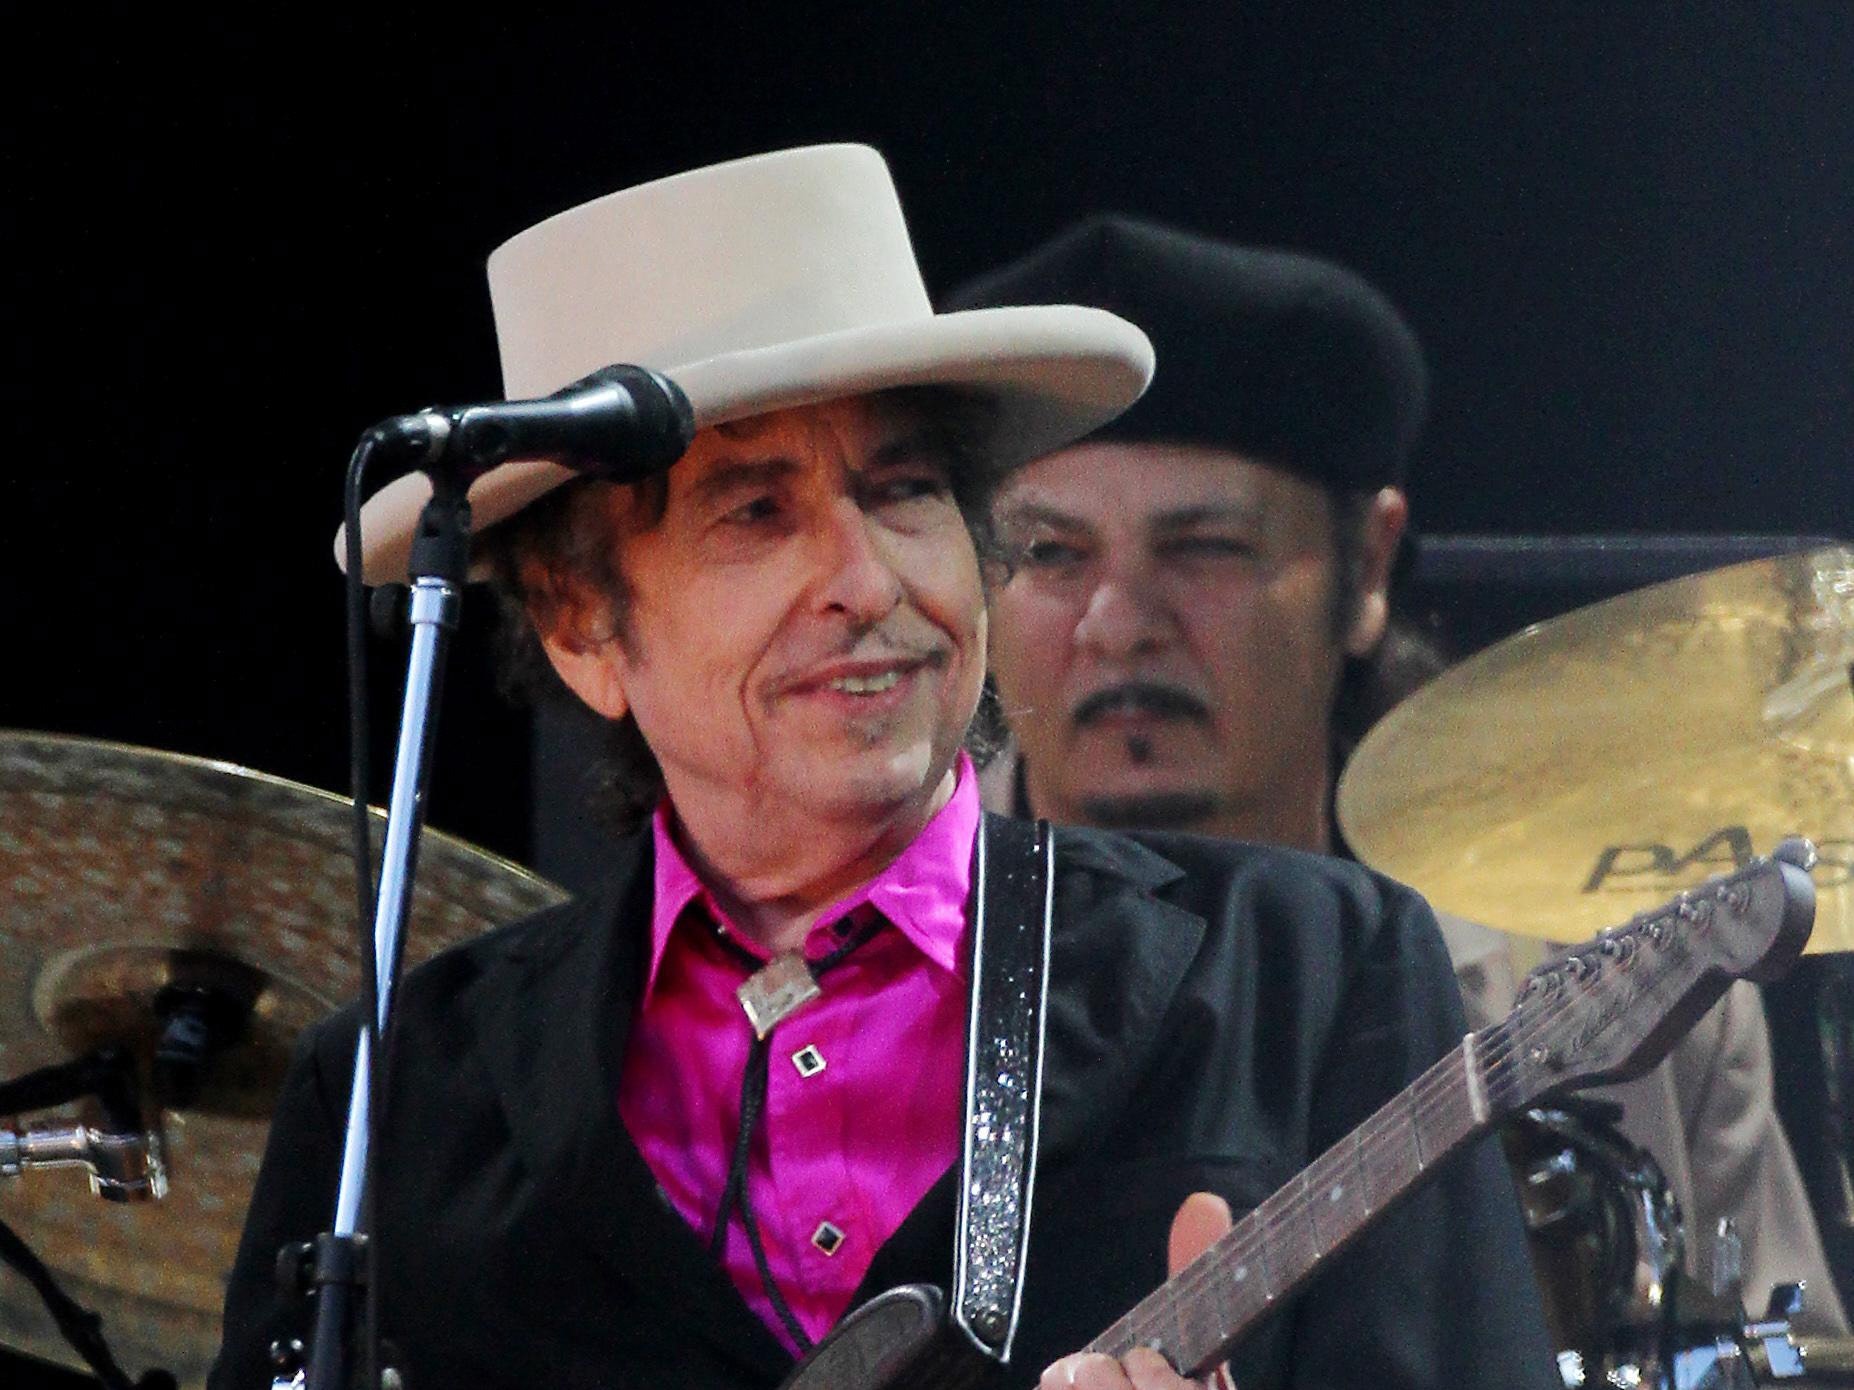 Bob Dylan and Neil Young to headline British Summer Time festival